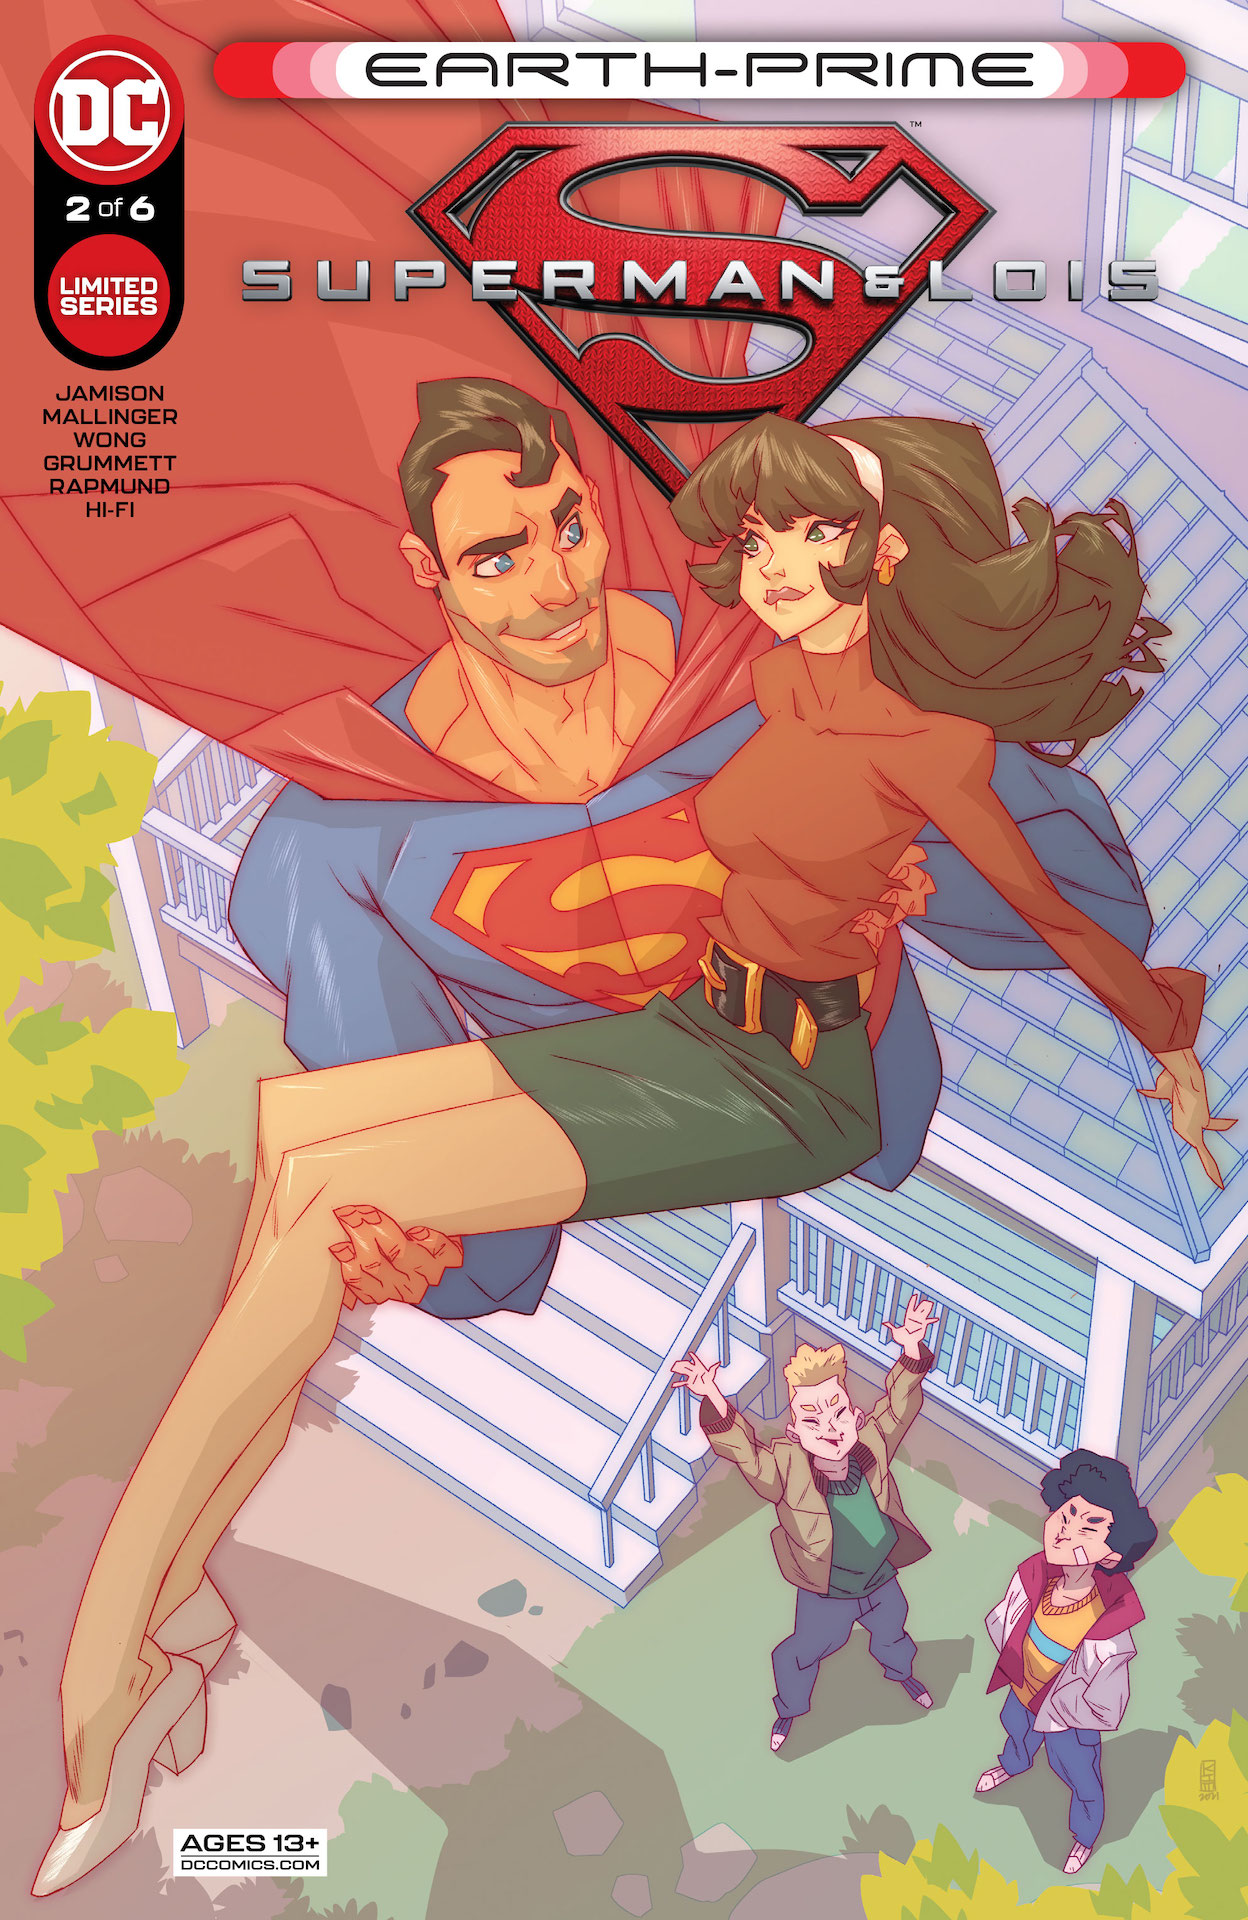 DC Preview: Earth Prime Superman and Lois #2